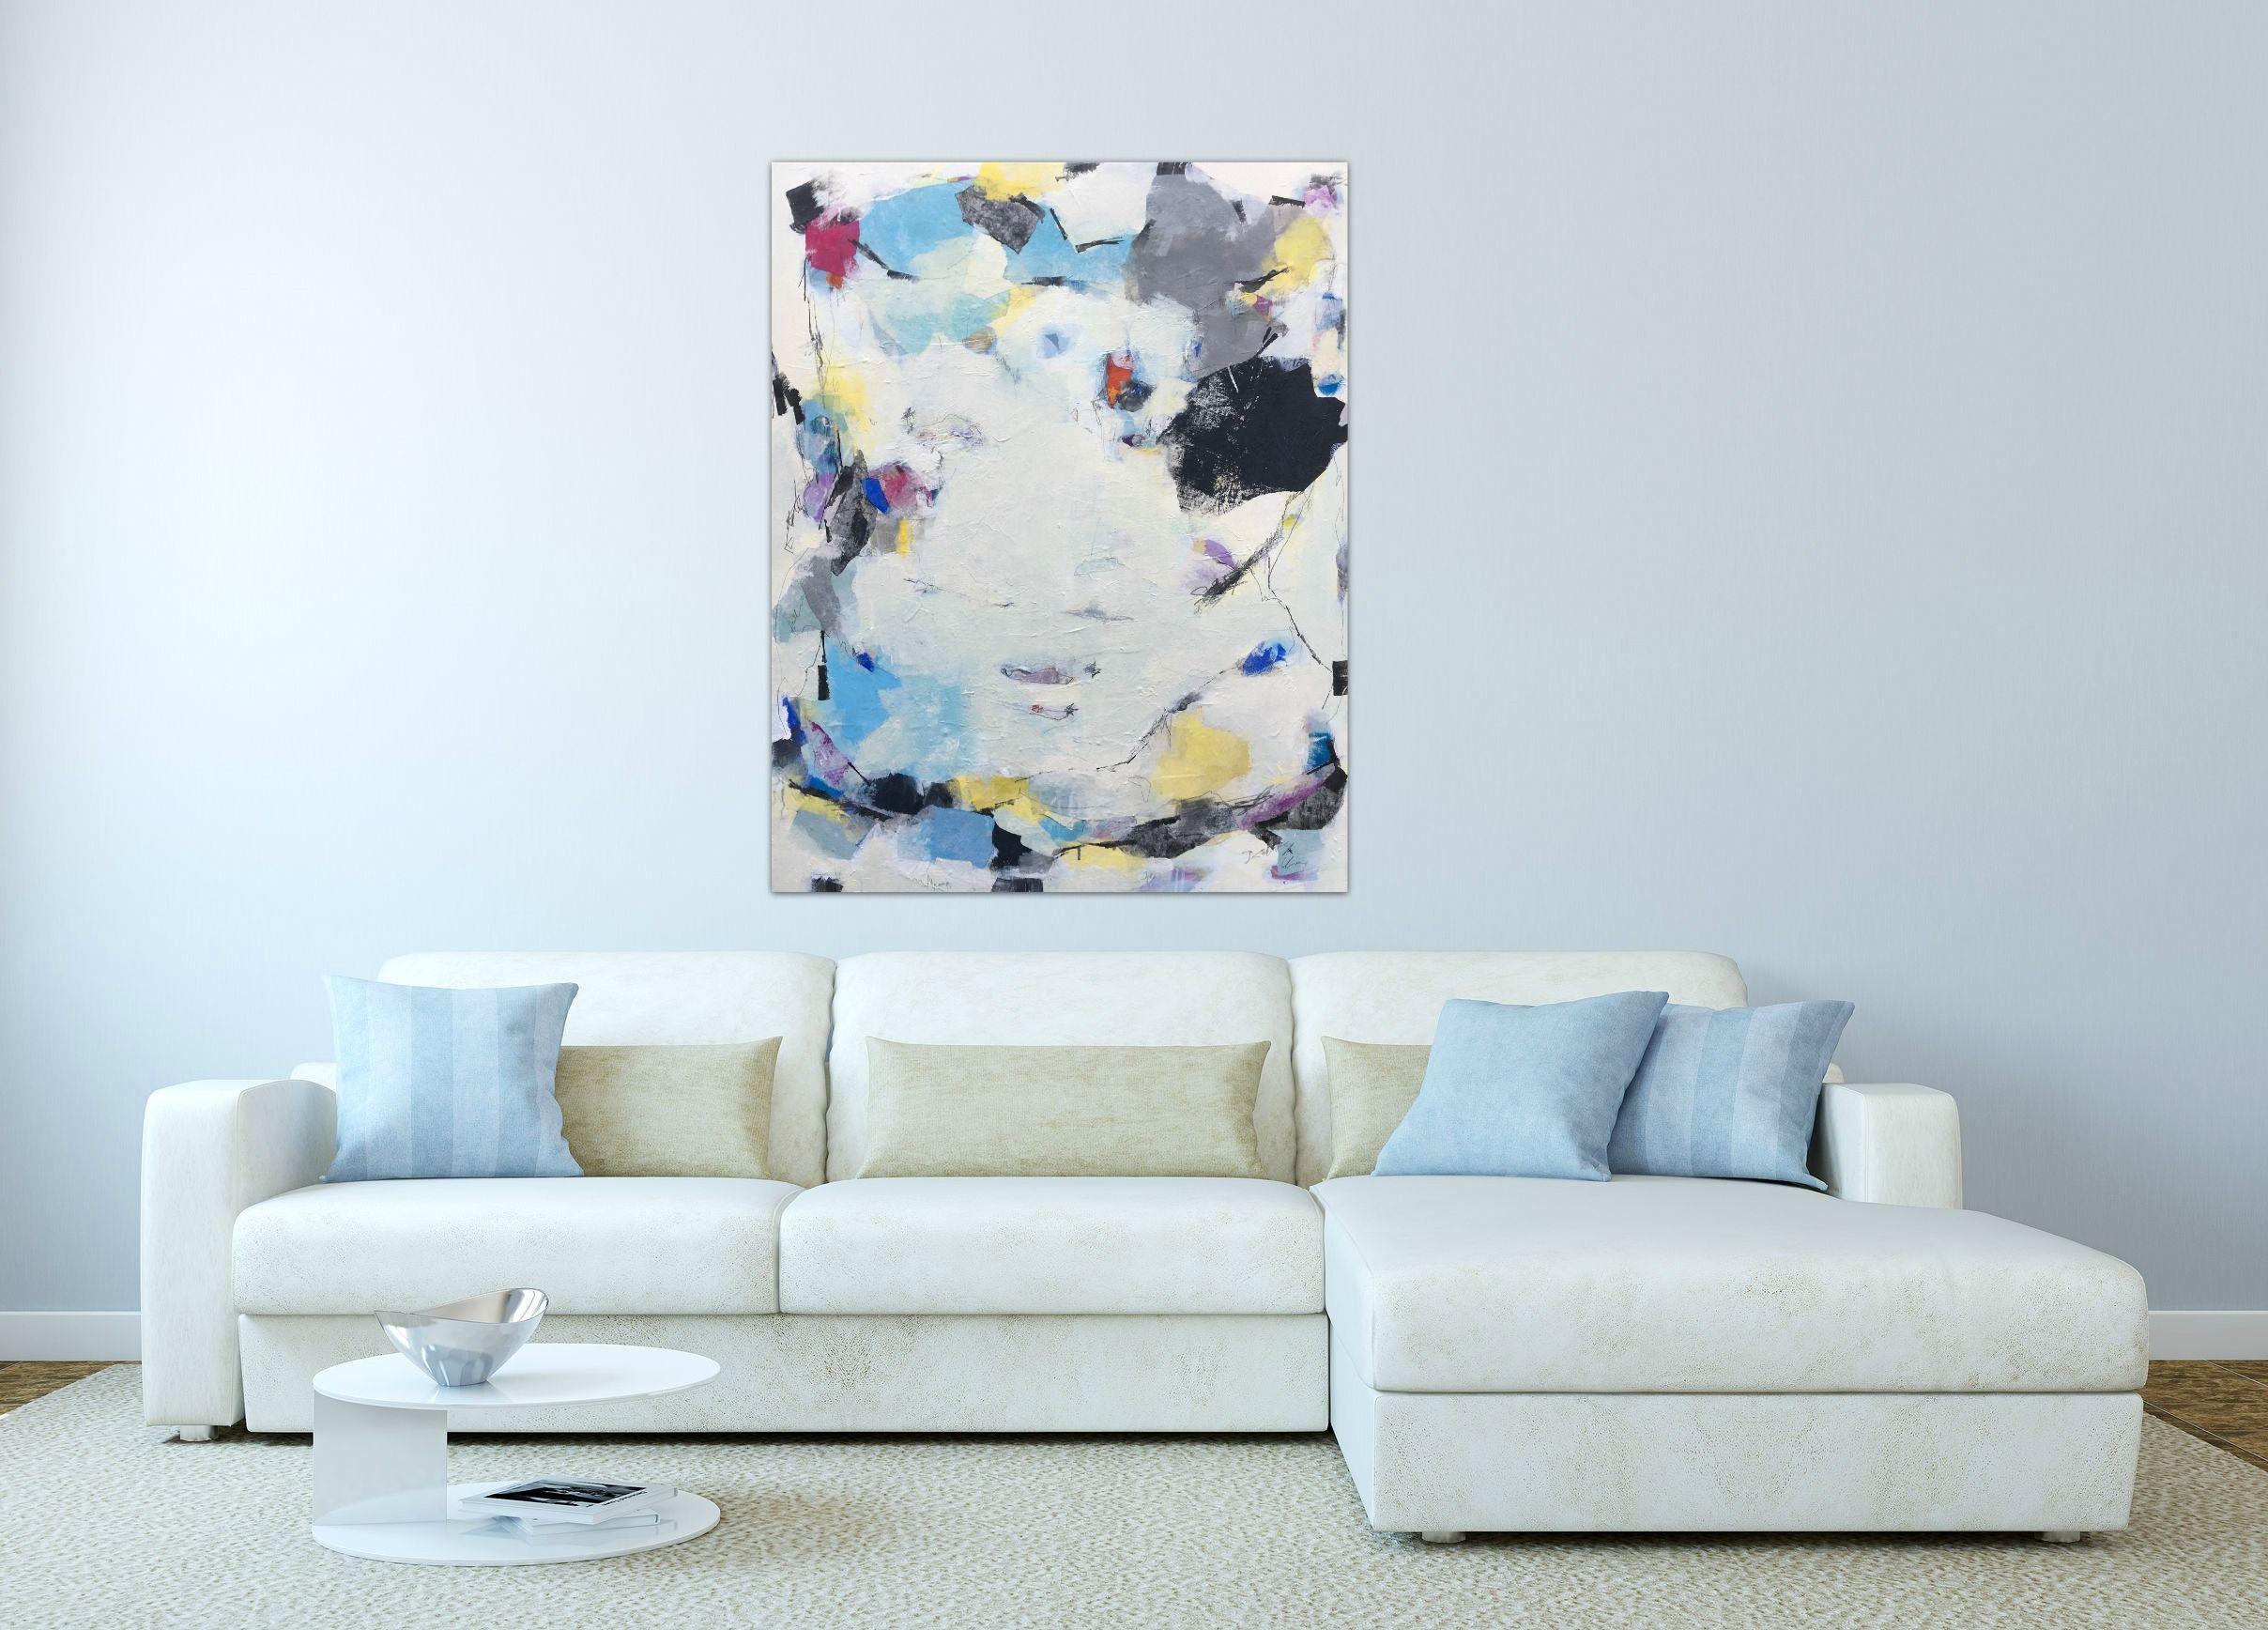 Soulful Memories, Painting, Acrylic on Canvas - Gray Abstract Painting by Angela Dierks